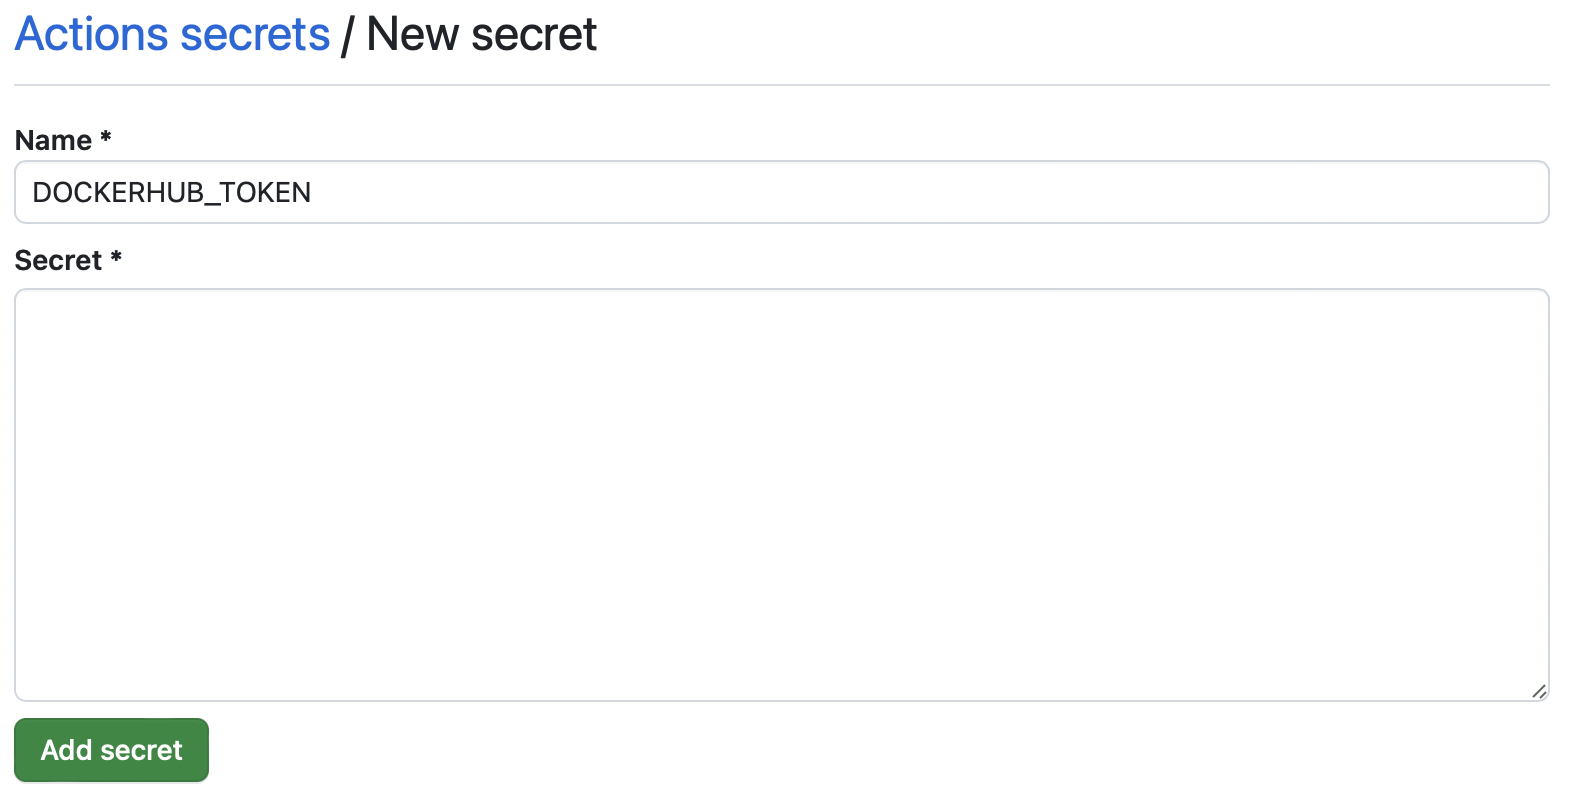 GitHub - Actions/New secret page with the Name field set to "DOCKERHUB_TOKEN"